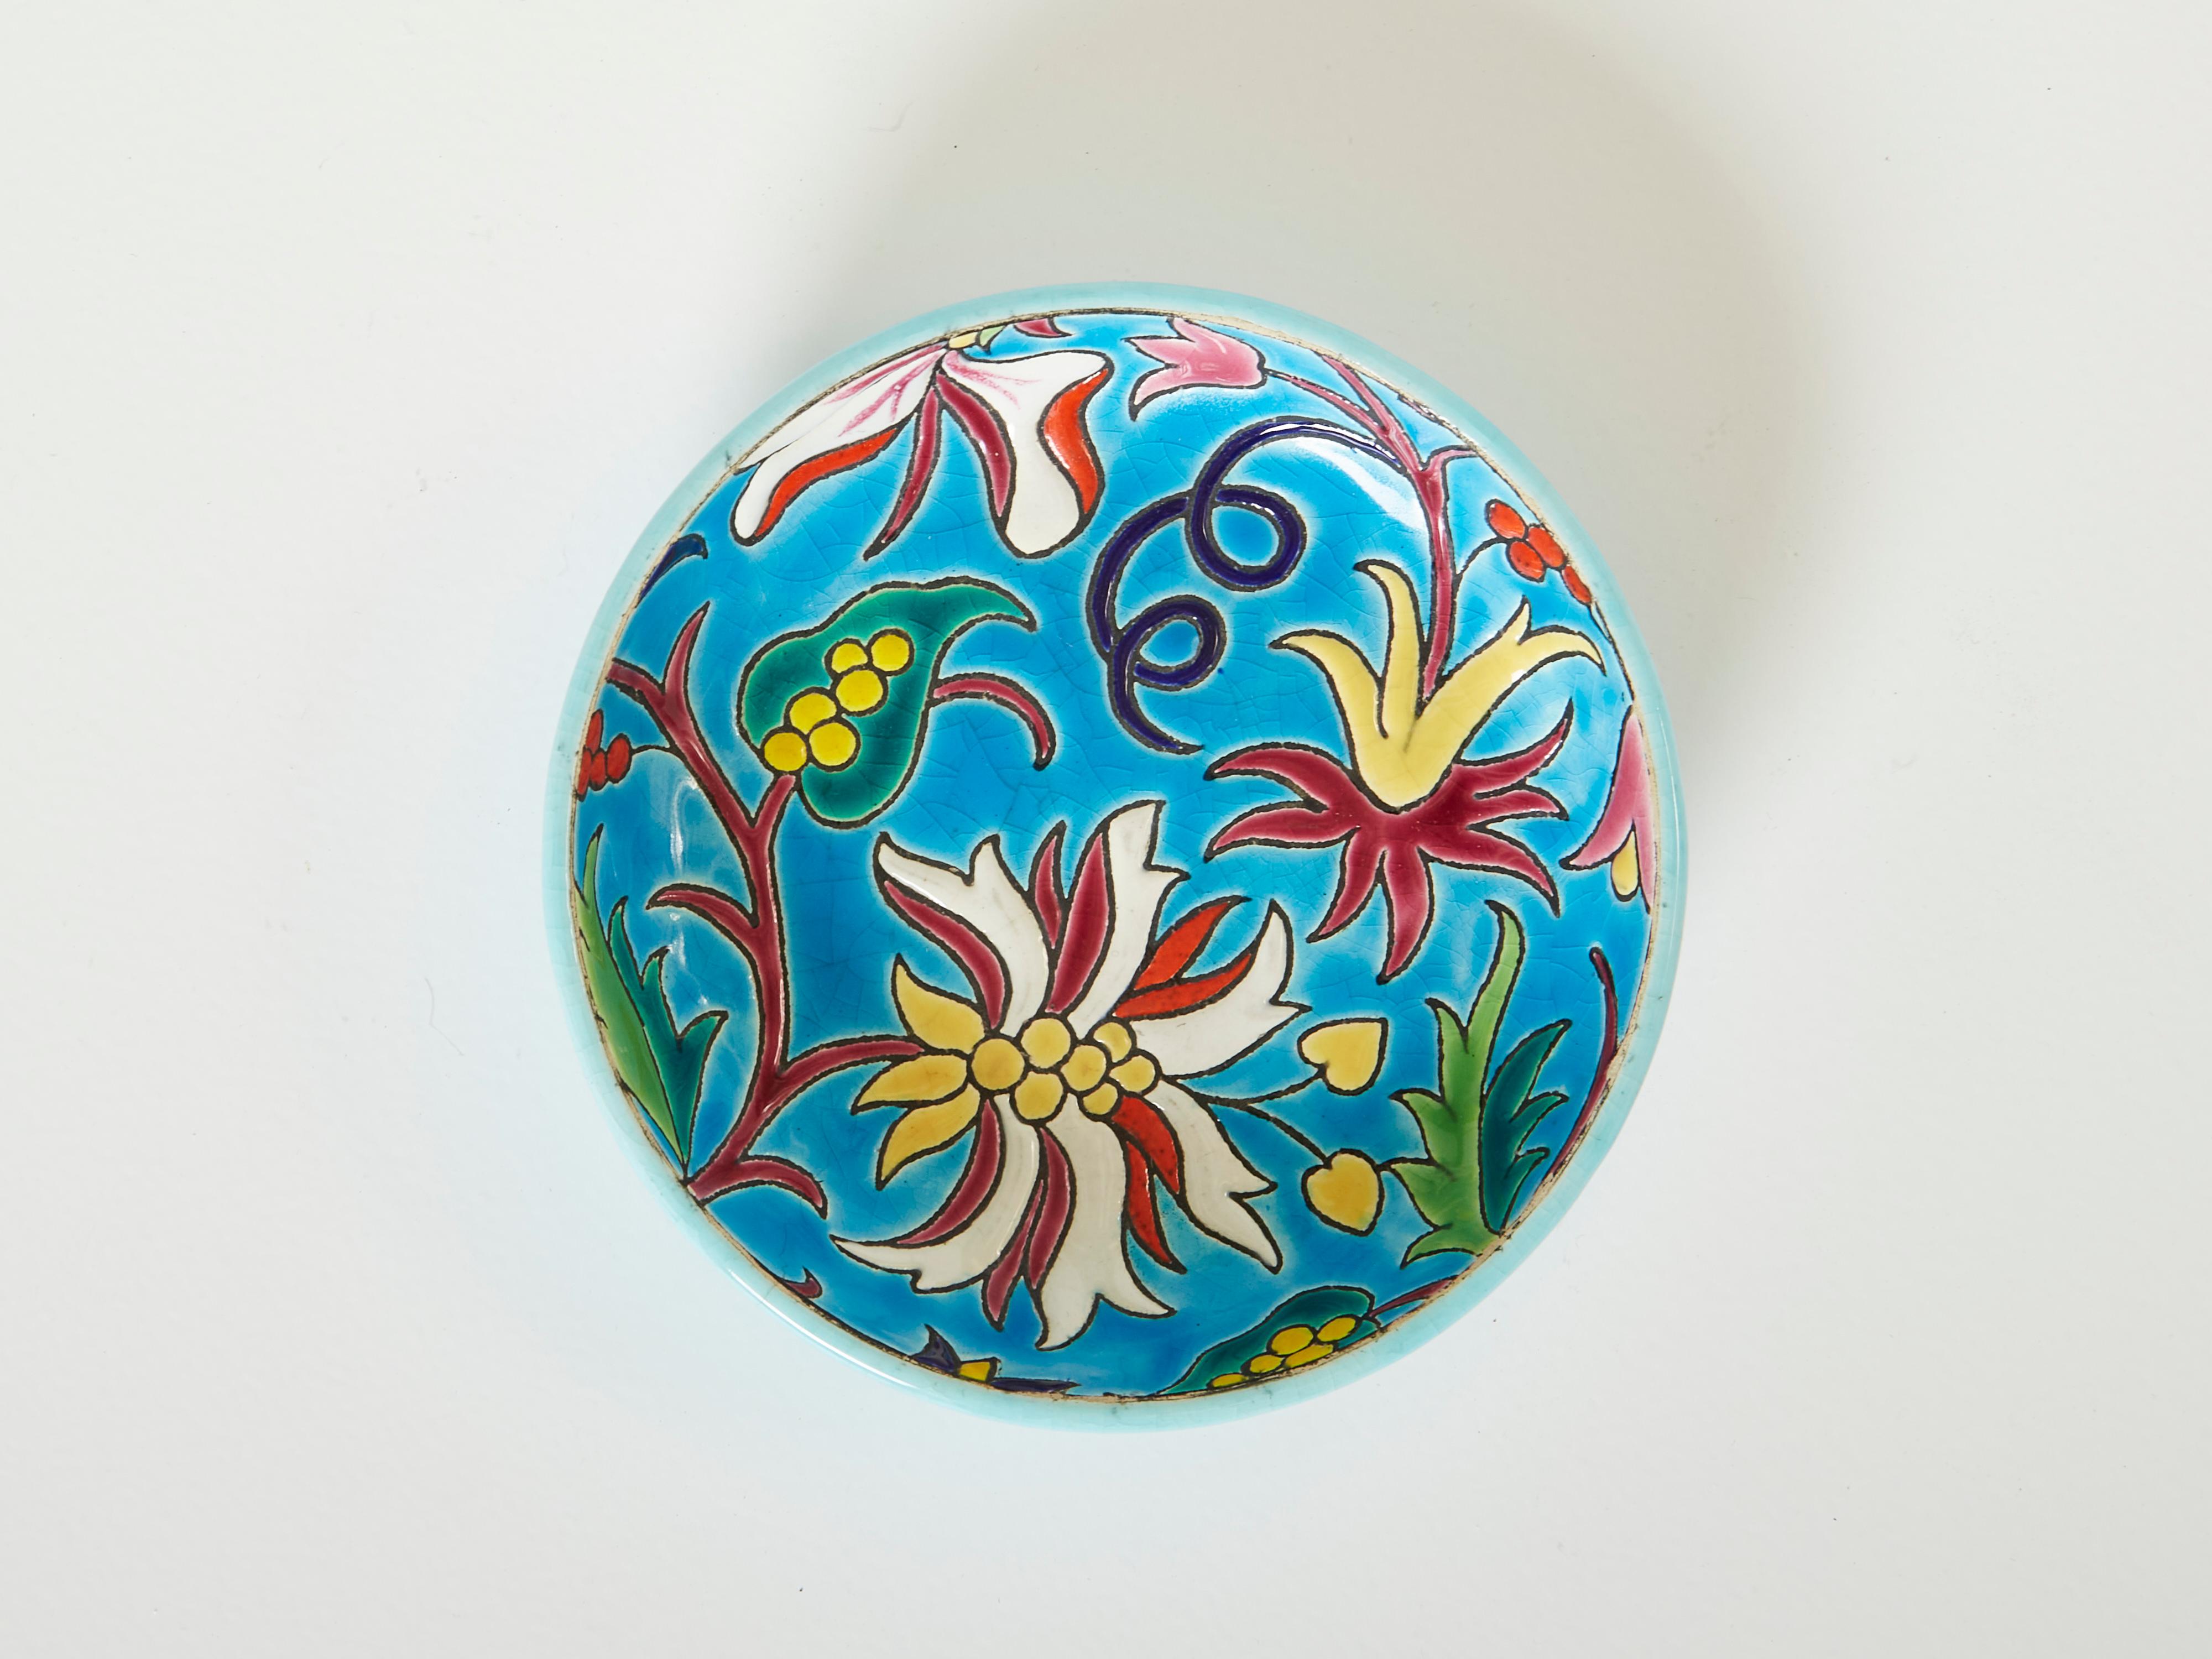 Colourful ceramic Art Deco round bowl by Faïenceries et Emaux de Longwy made around 1950. This turquoise blue bowl features beautiful flowers all around, and Longwy's signature craquelure glaze. The Longwy manufacture has hundreds of years of